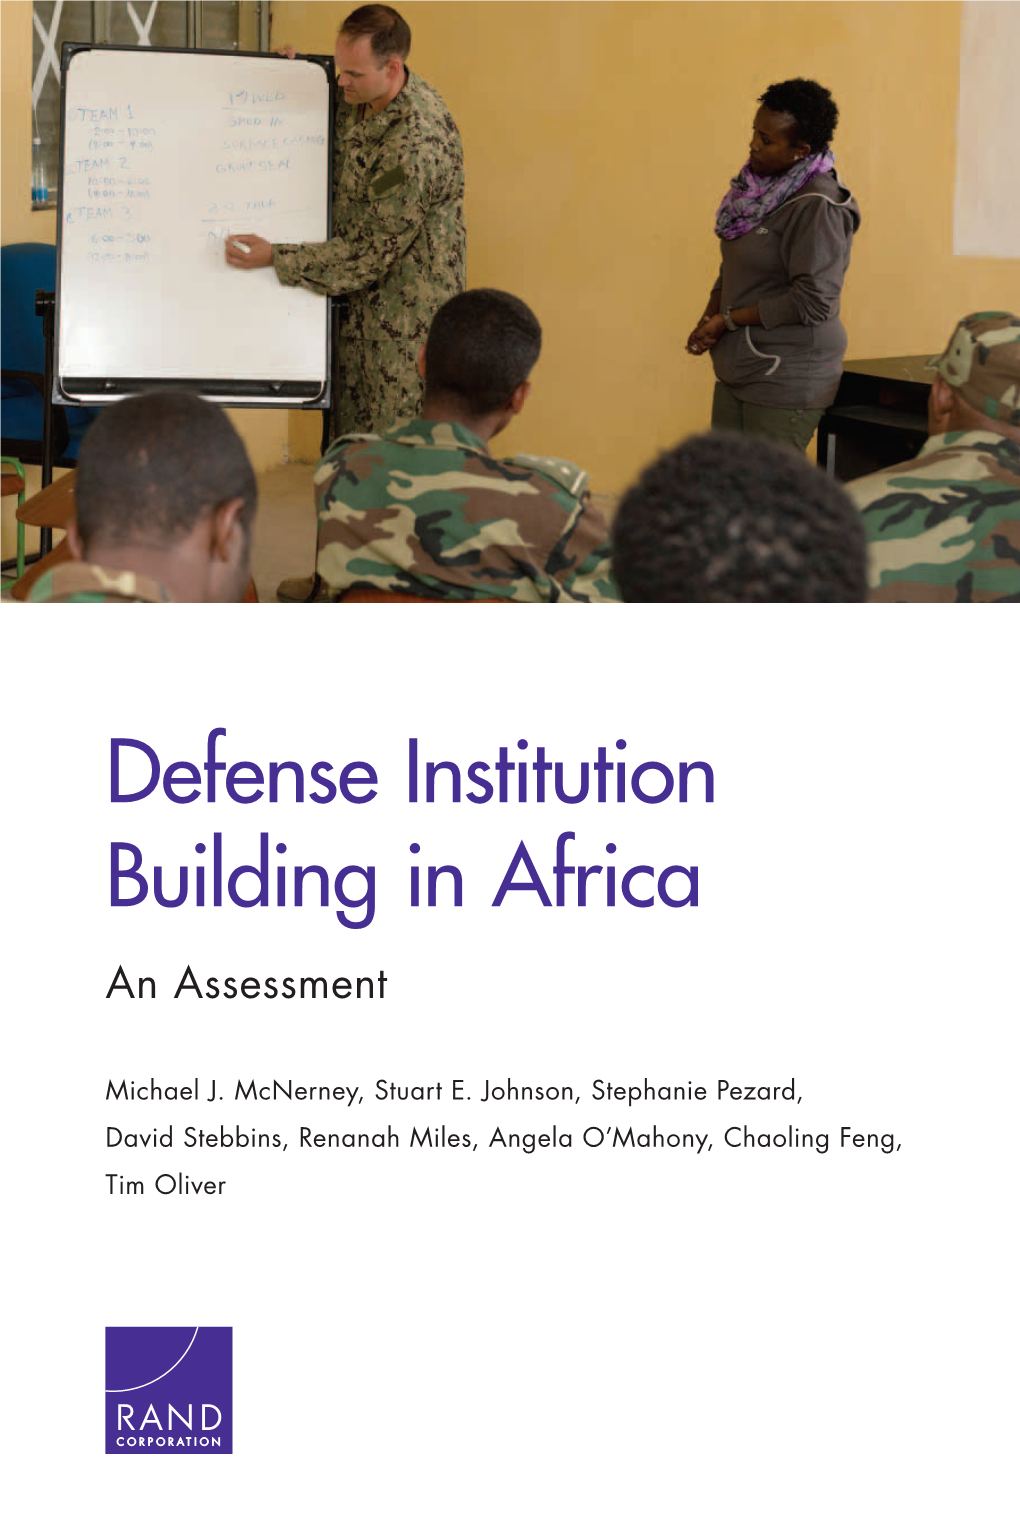 Defense Institution Building in Africa: an Assessment